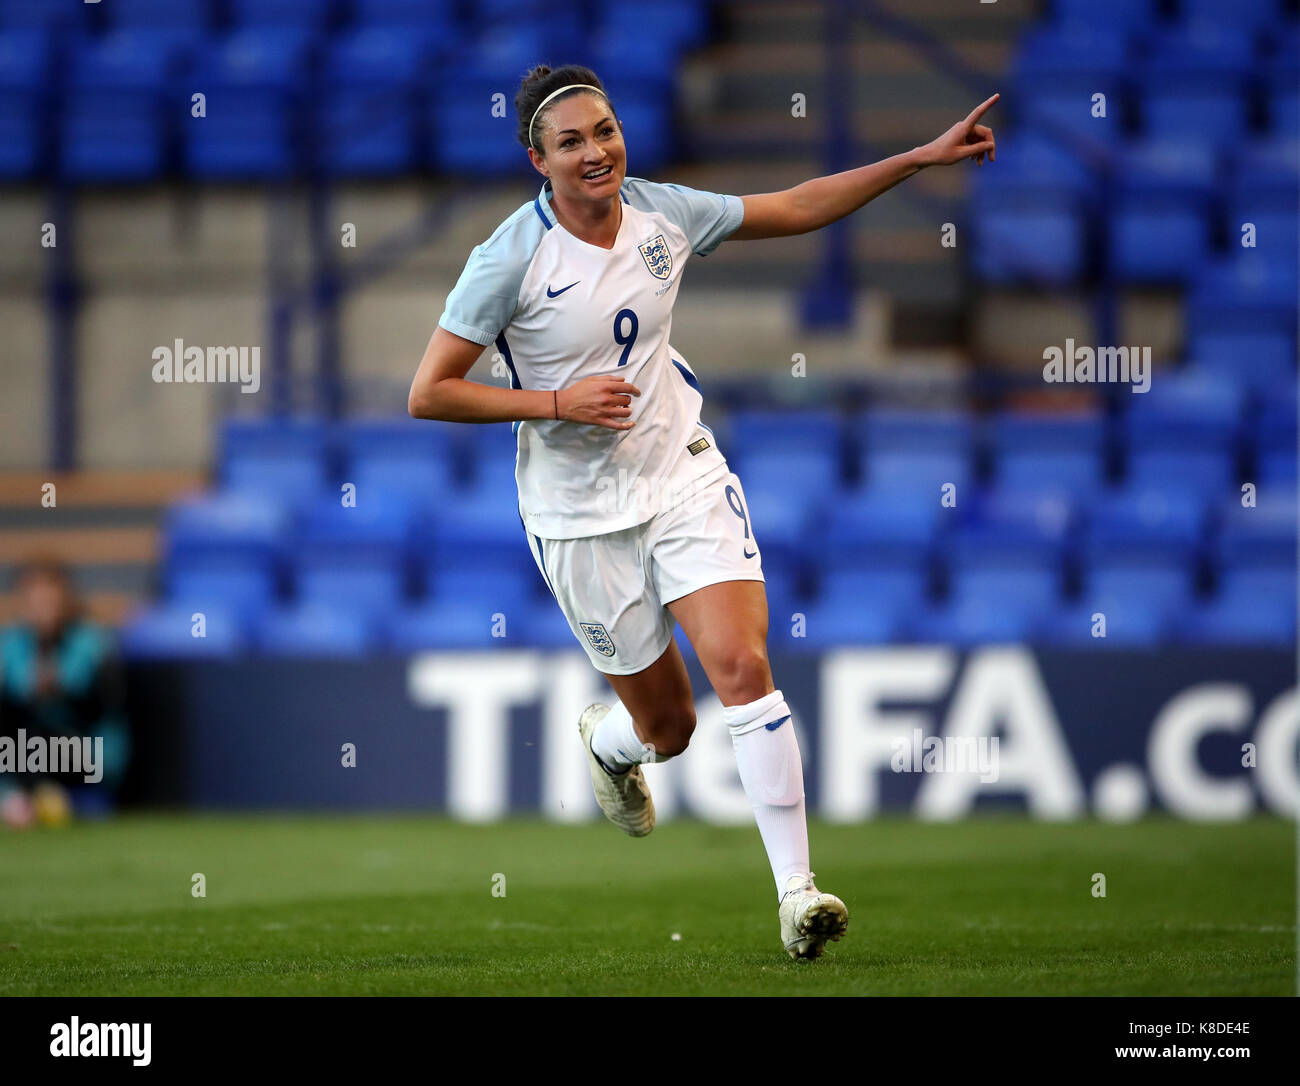 England S Jodie Taylor Celebrates Scoring Her Side S Second Goal Of The Game During The Fifa